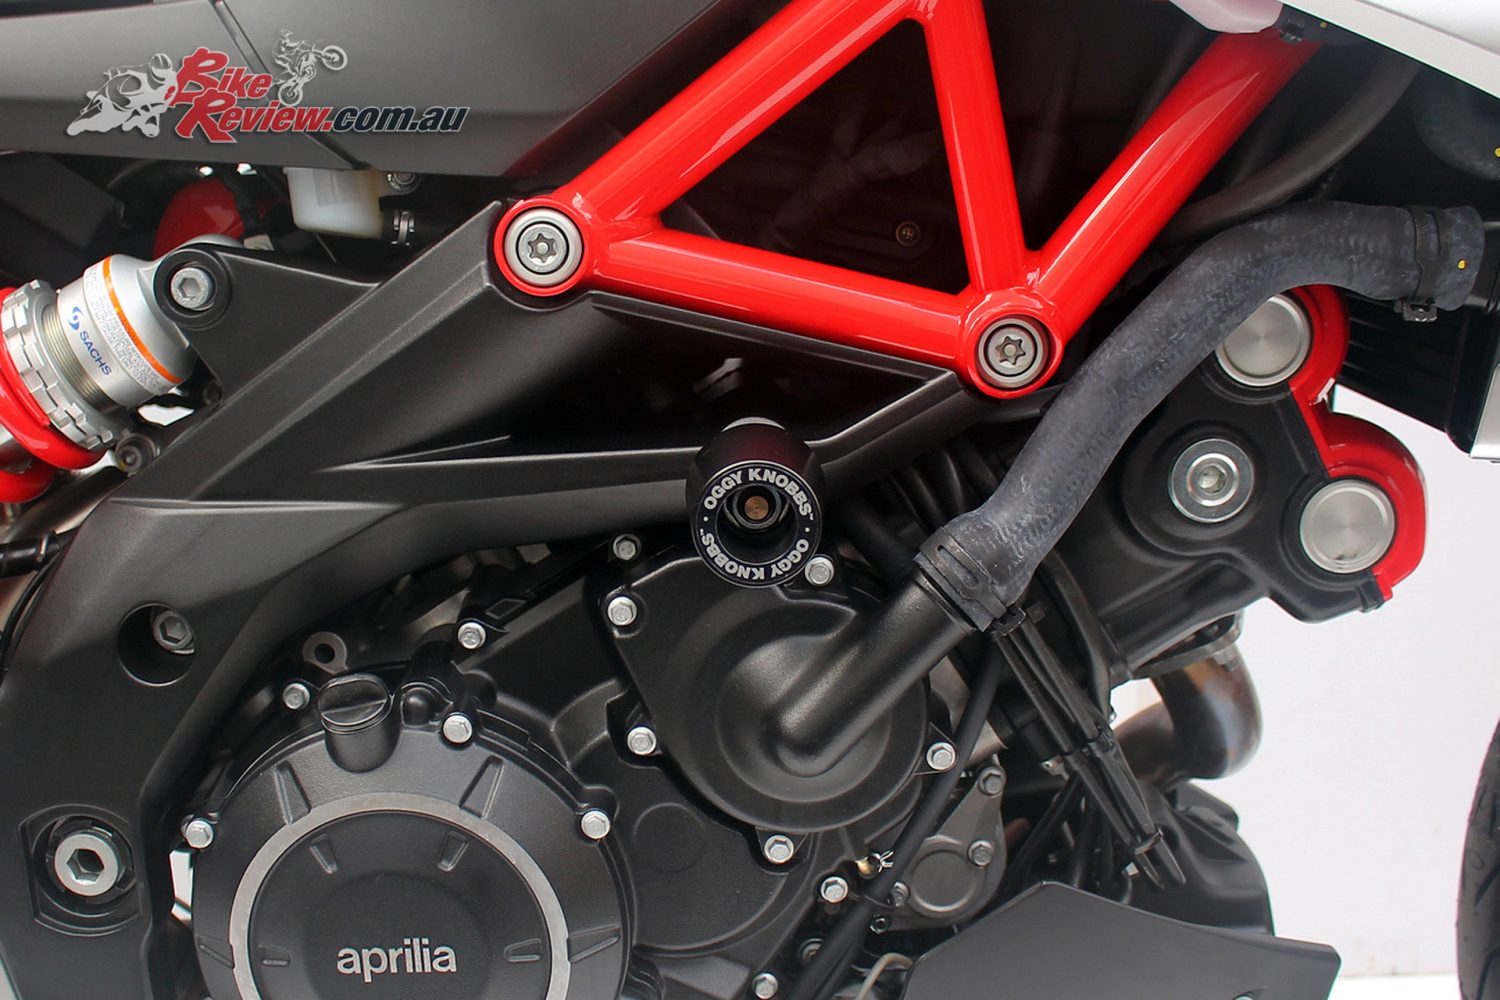 Oggy Knobbs are now available for the Aprilia Shiver and Dorsoduro 900s